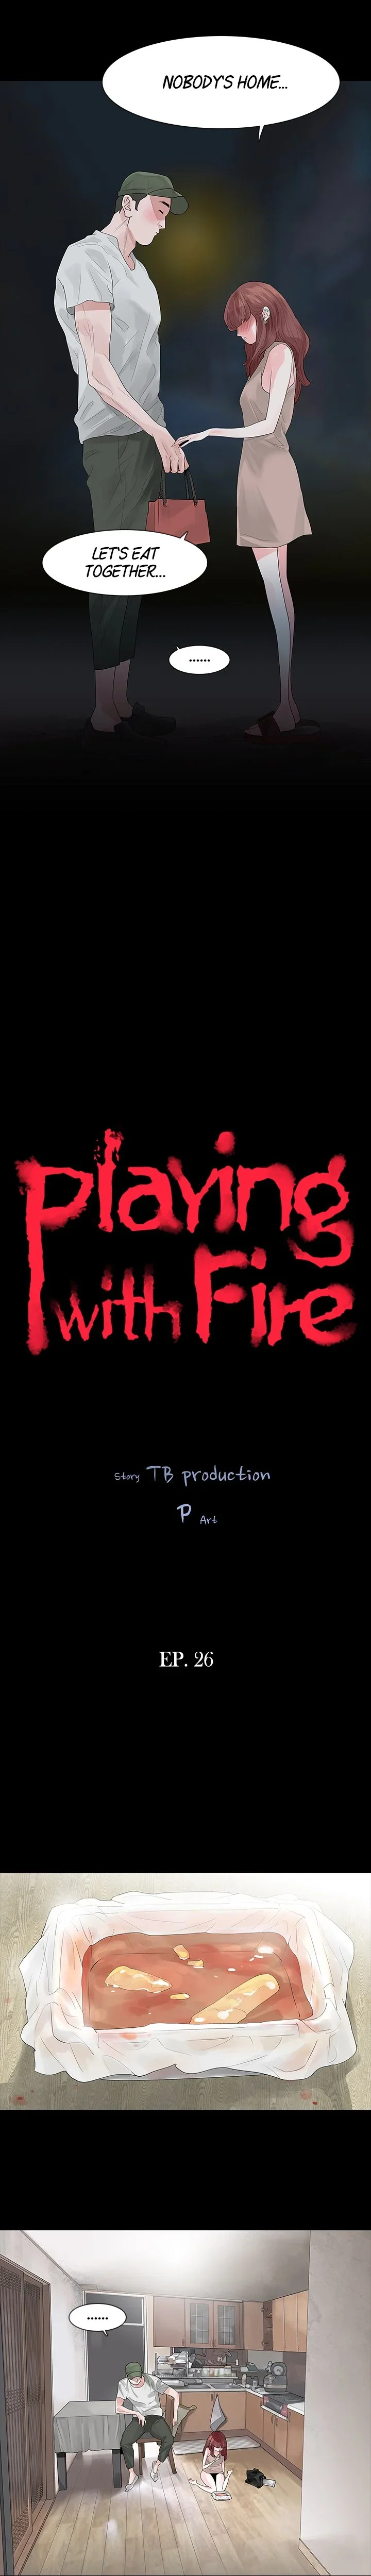 playing-with-fire-chap-26-1